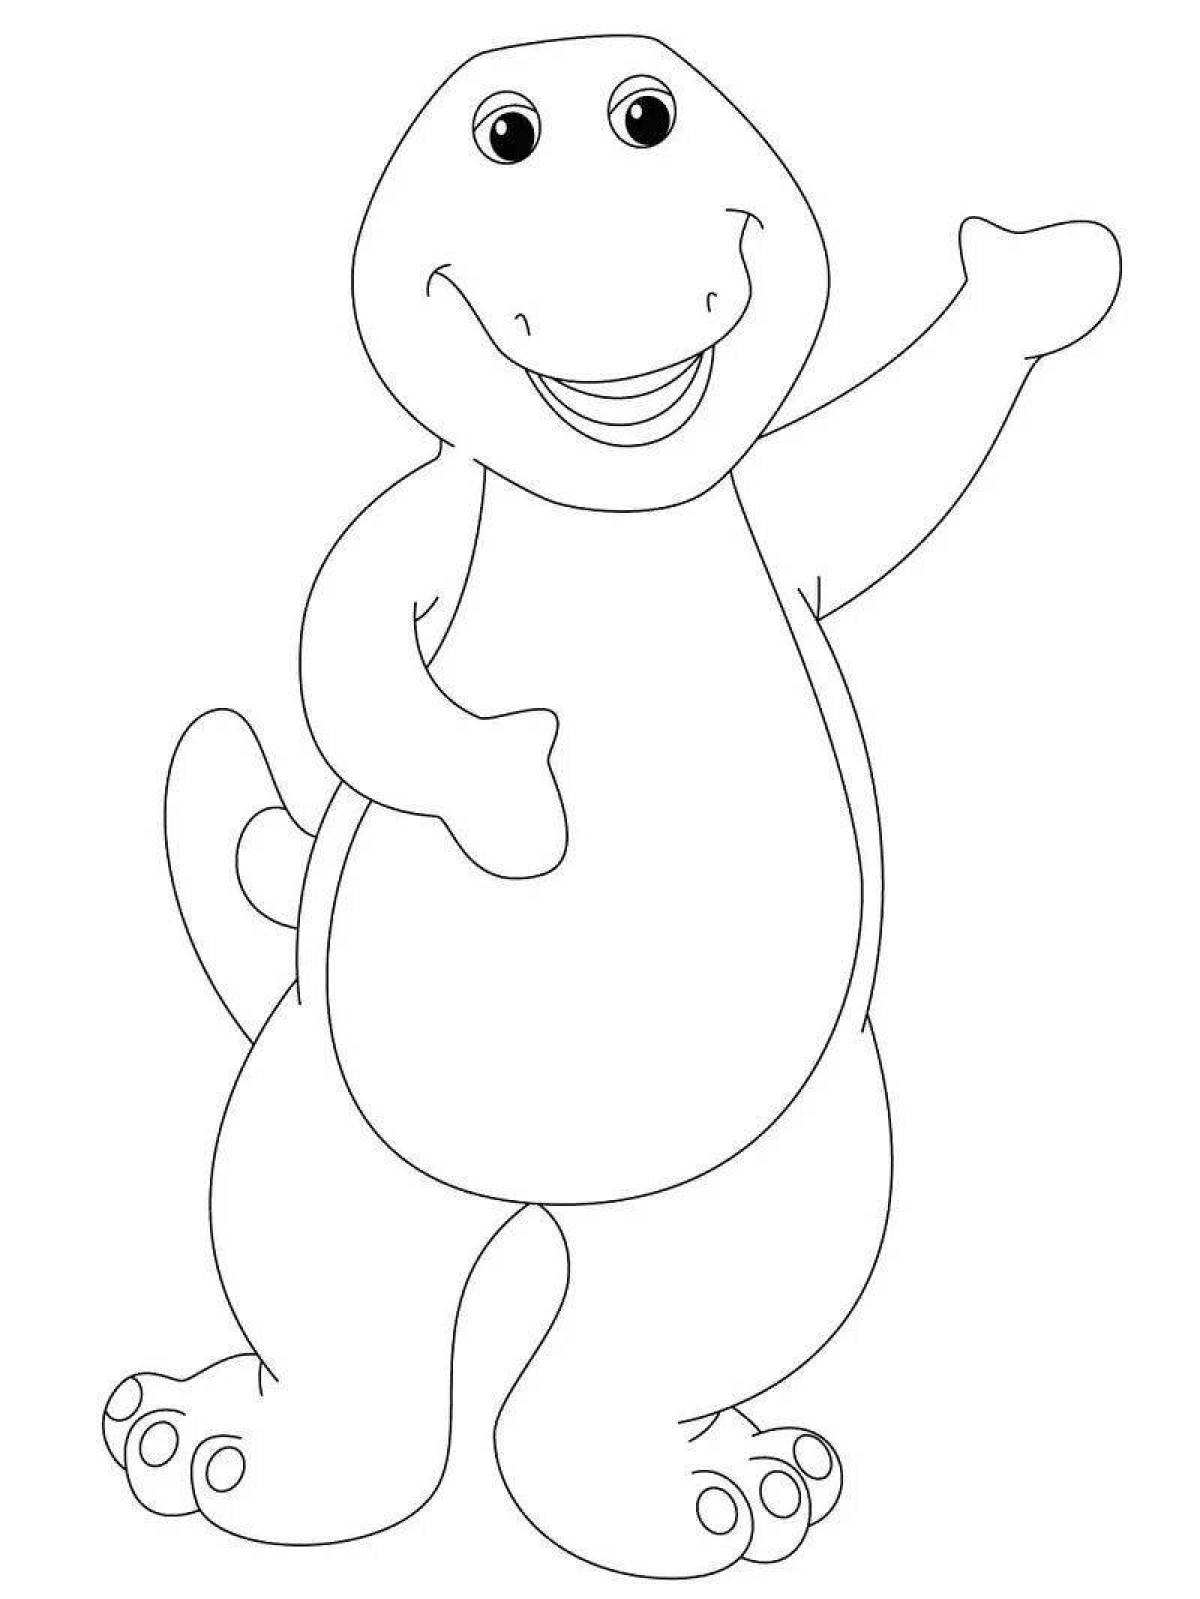 Coloring page friendly barney bear